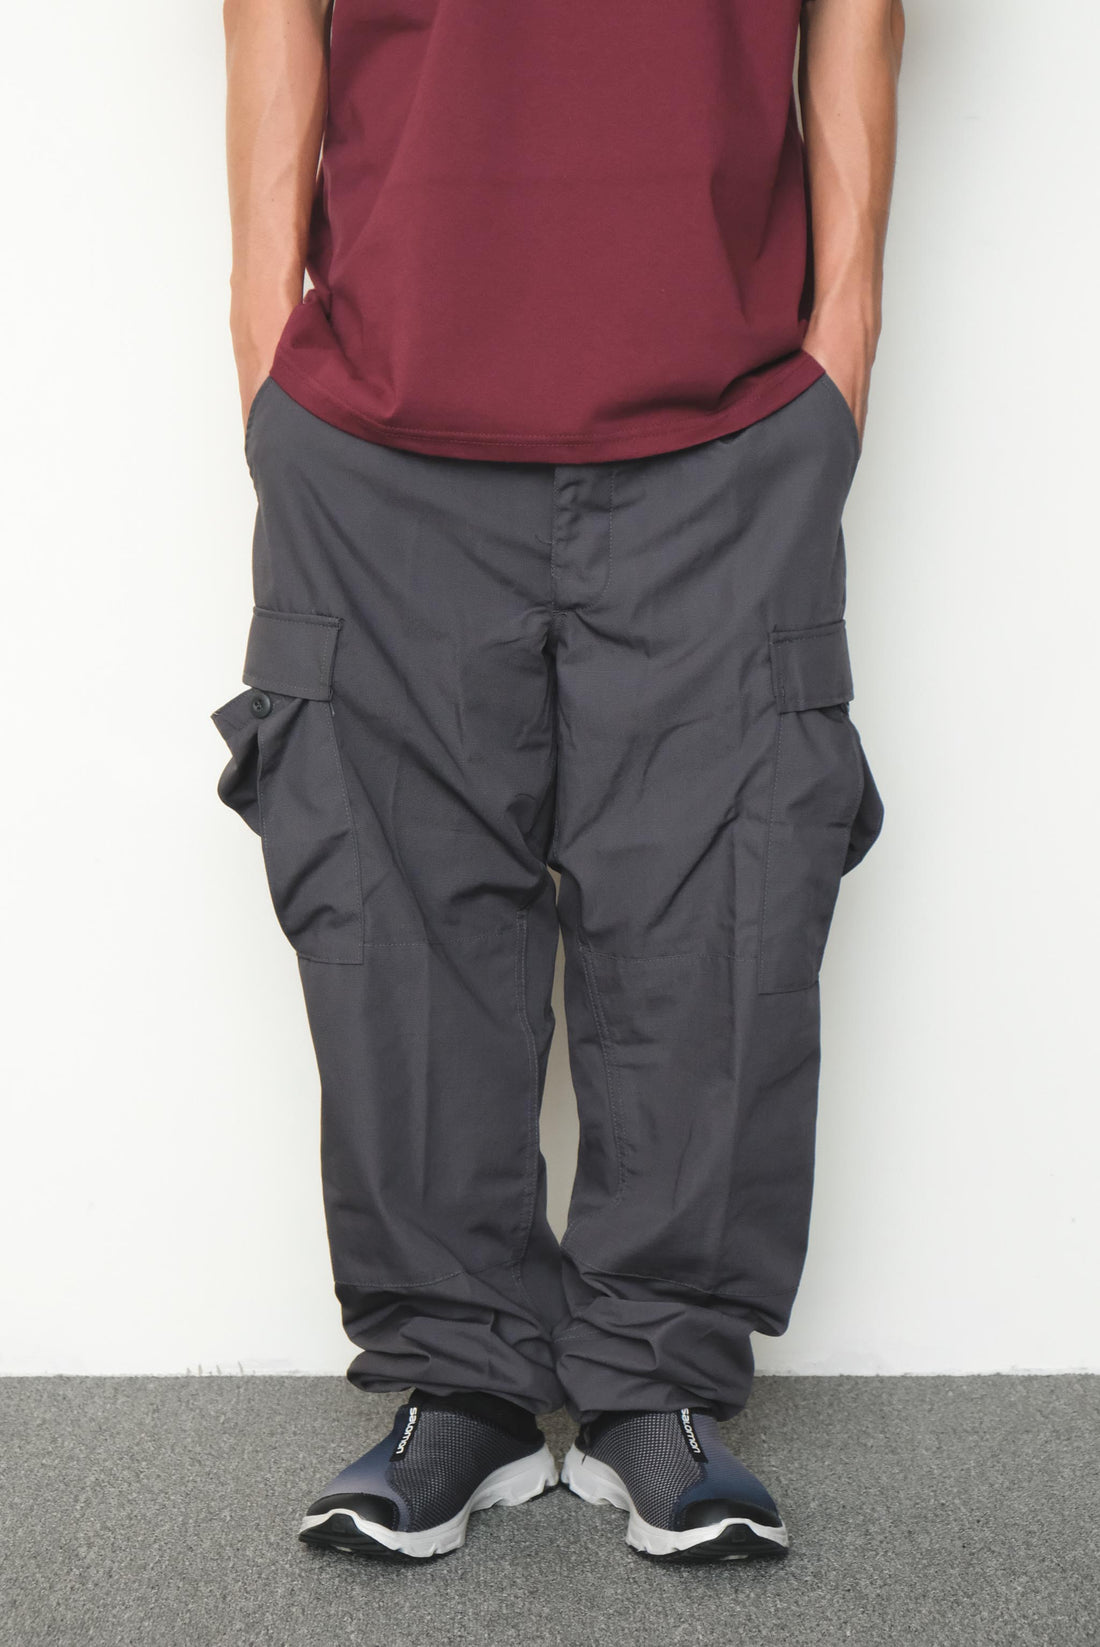 PROPPER Cargo Pants are lightweight and breathable, they provide maximum durability in classic style with all the functional details you need. The perfect Ripstop BDU Trousers for warmer days. Propper is a manufacturer of MIL-SPEC clothing. Since 1967, it has been one of the main uniform suppliers to the United States military. ROSYTH TERRACE Authorized Distributor of PROPPER Singapore.